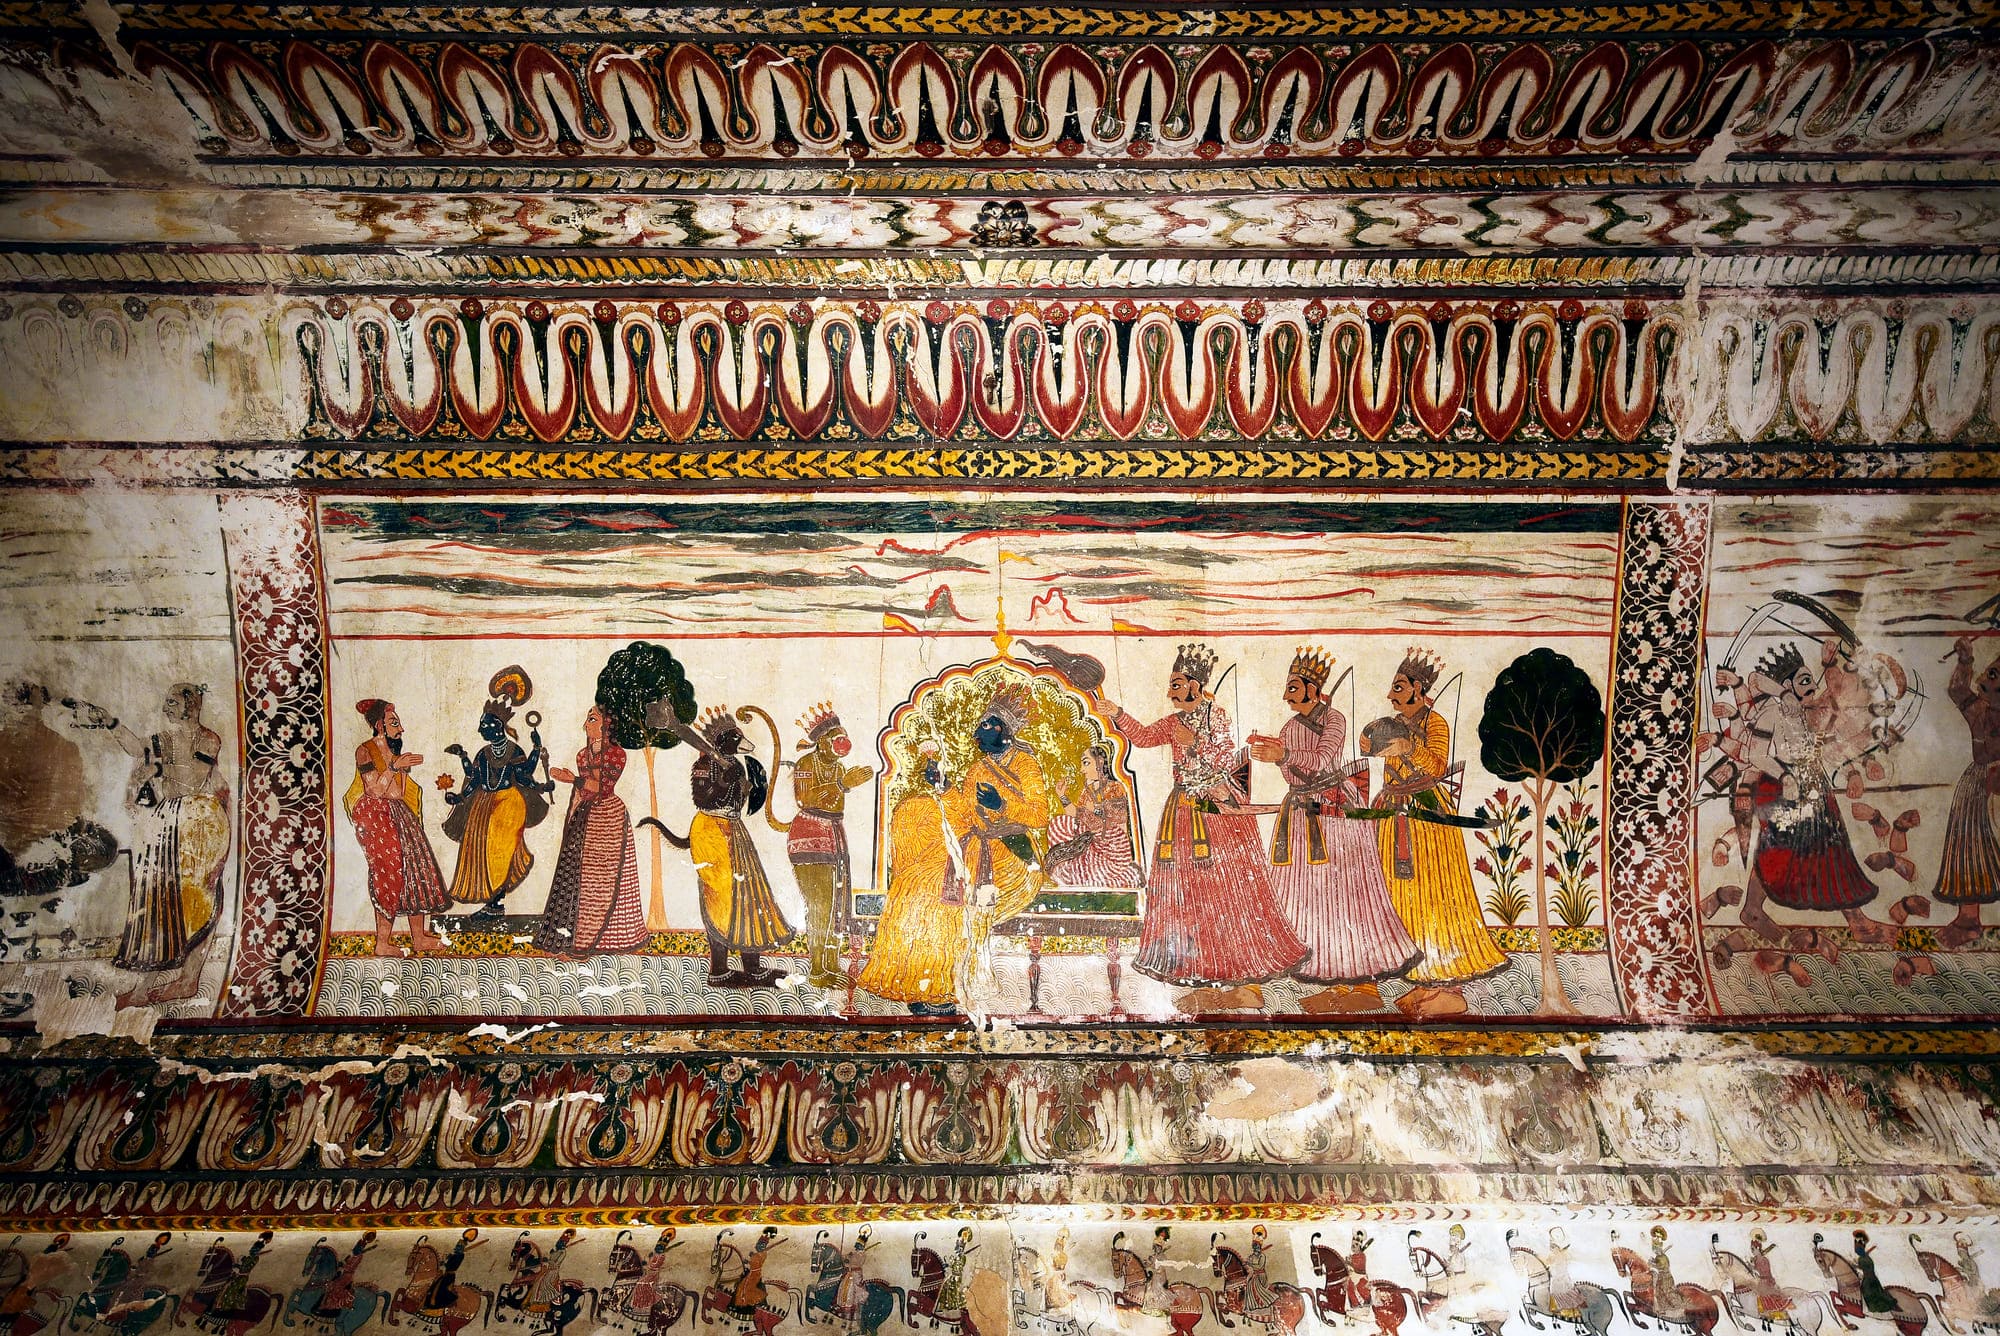 Lord Rama, one of the 10 reincarnations of God Vishnu, sitting on a throne in a royal posture with his wife Sita, accompanied by their advisers Hanuman (Monkey God) and Jambawan (King of Bears), Orchha 